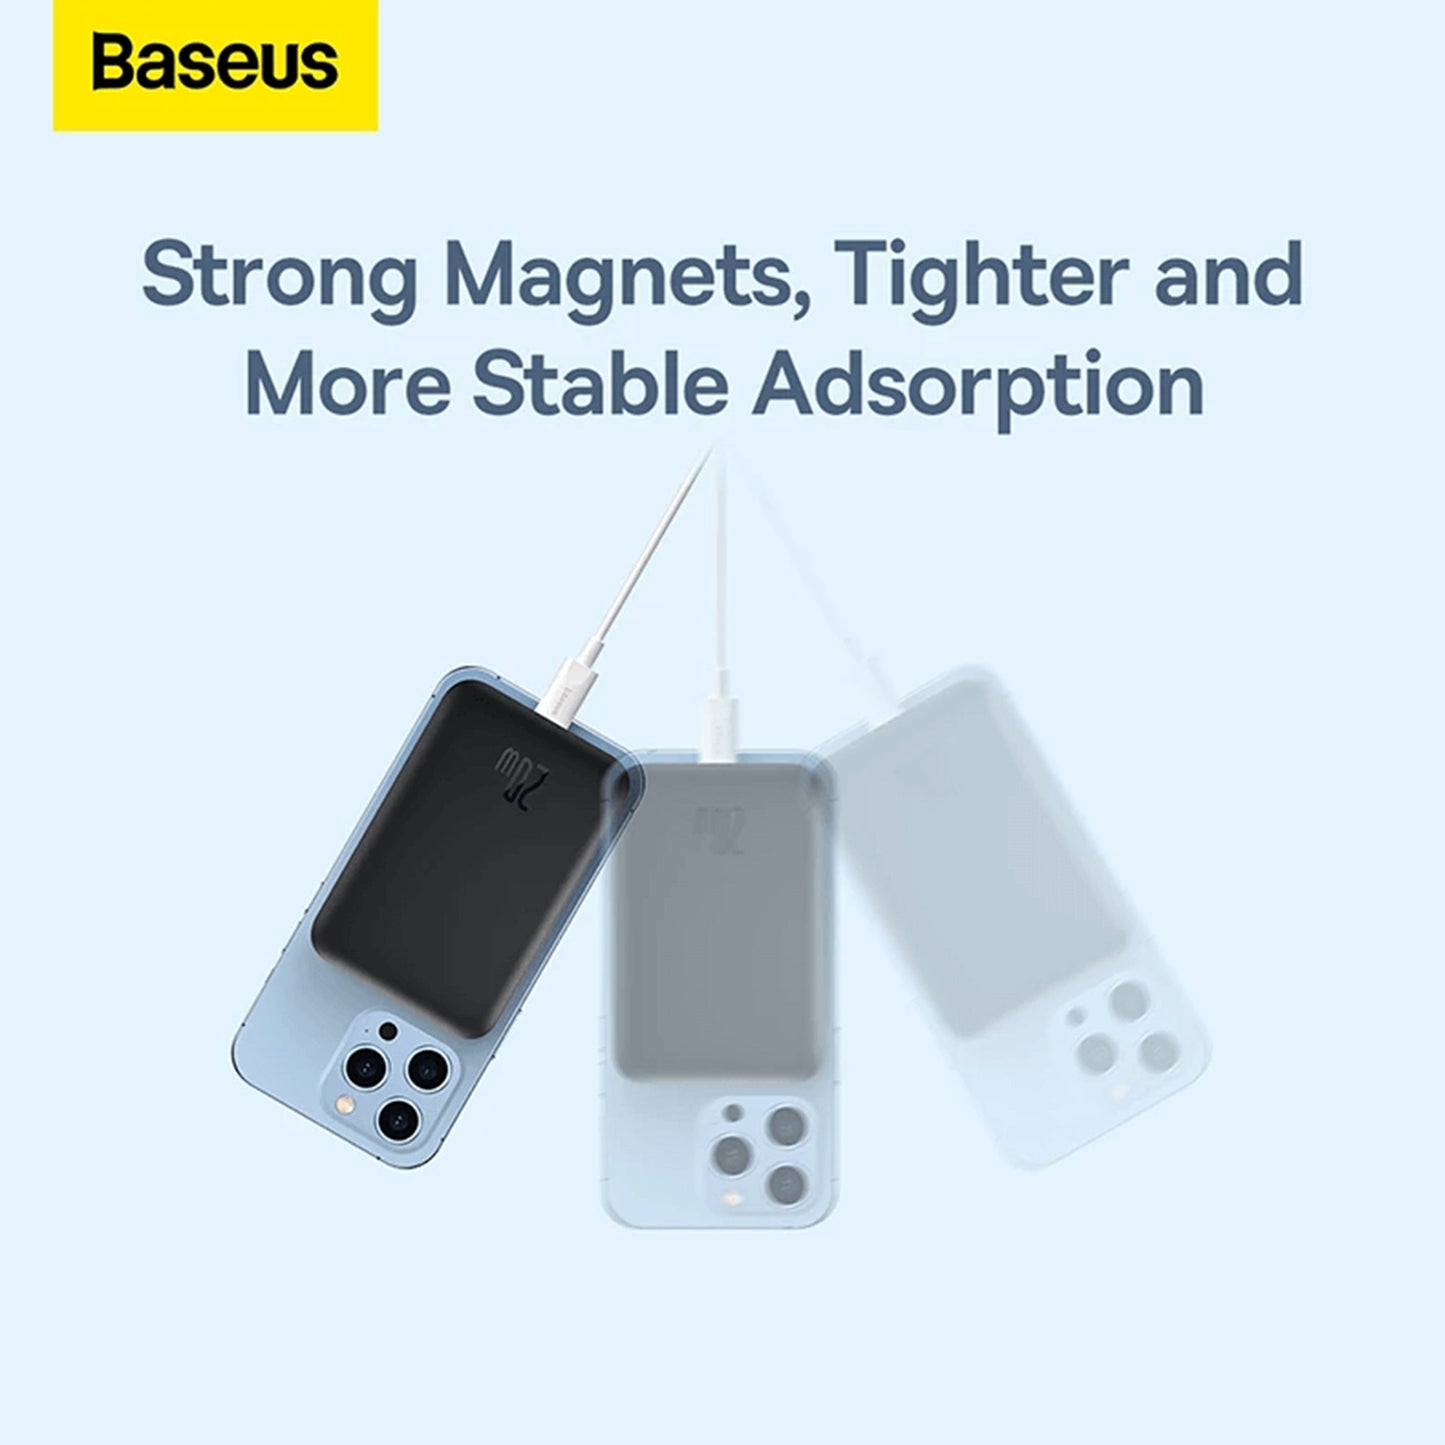 Baseus Magnetic Wireless Charging Power bank 6000mAh 20W Black tighter and stable